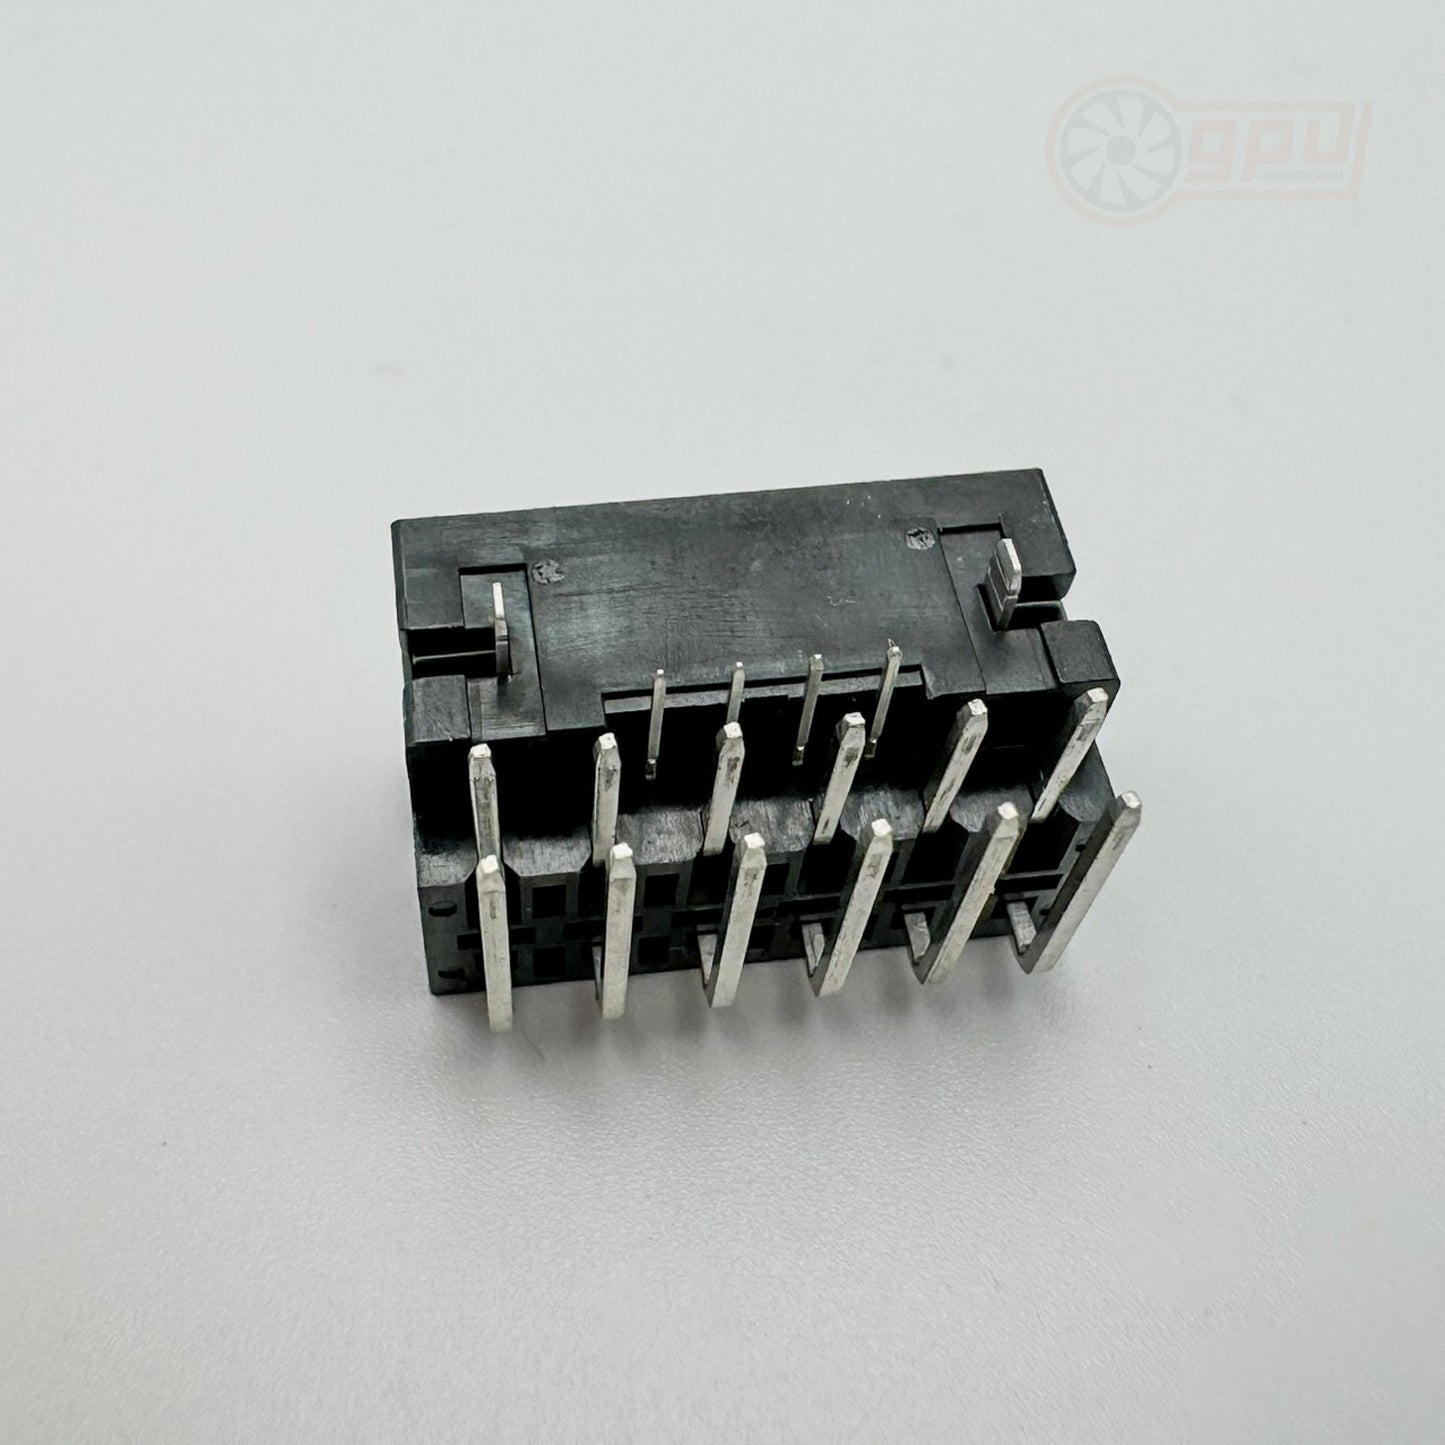 16Pin (12+4) PCI-E HPWR Power Connector Replacement Socket Header - GPUCONNECT.COM